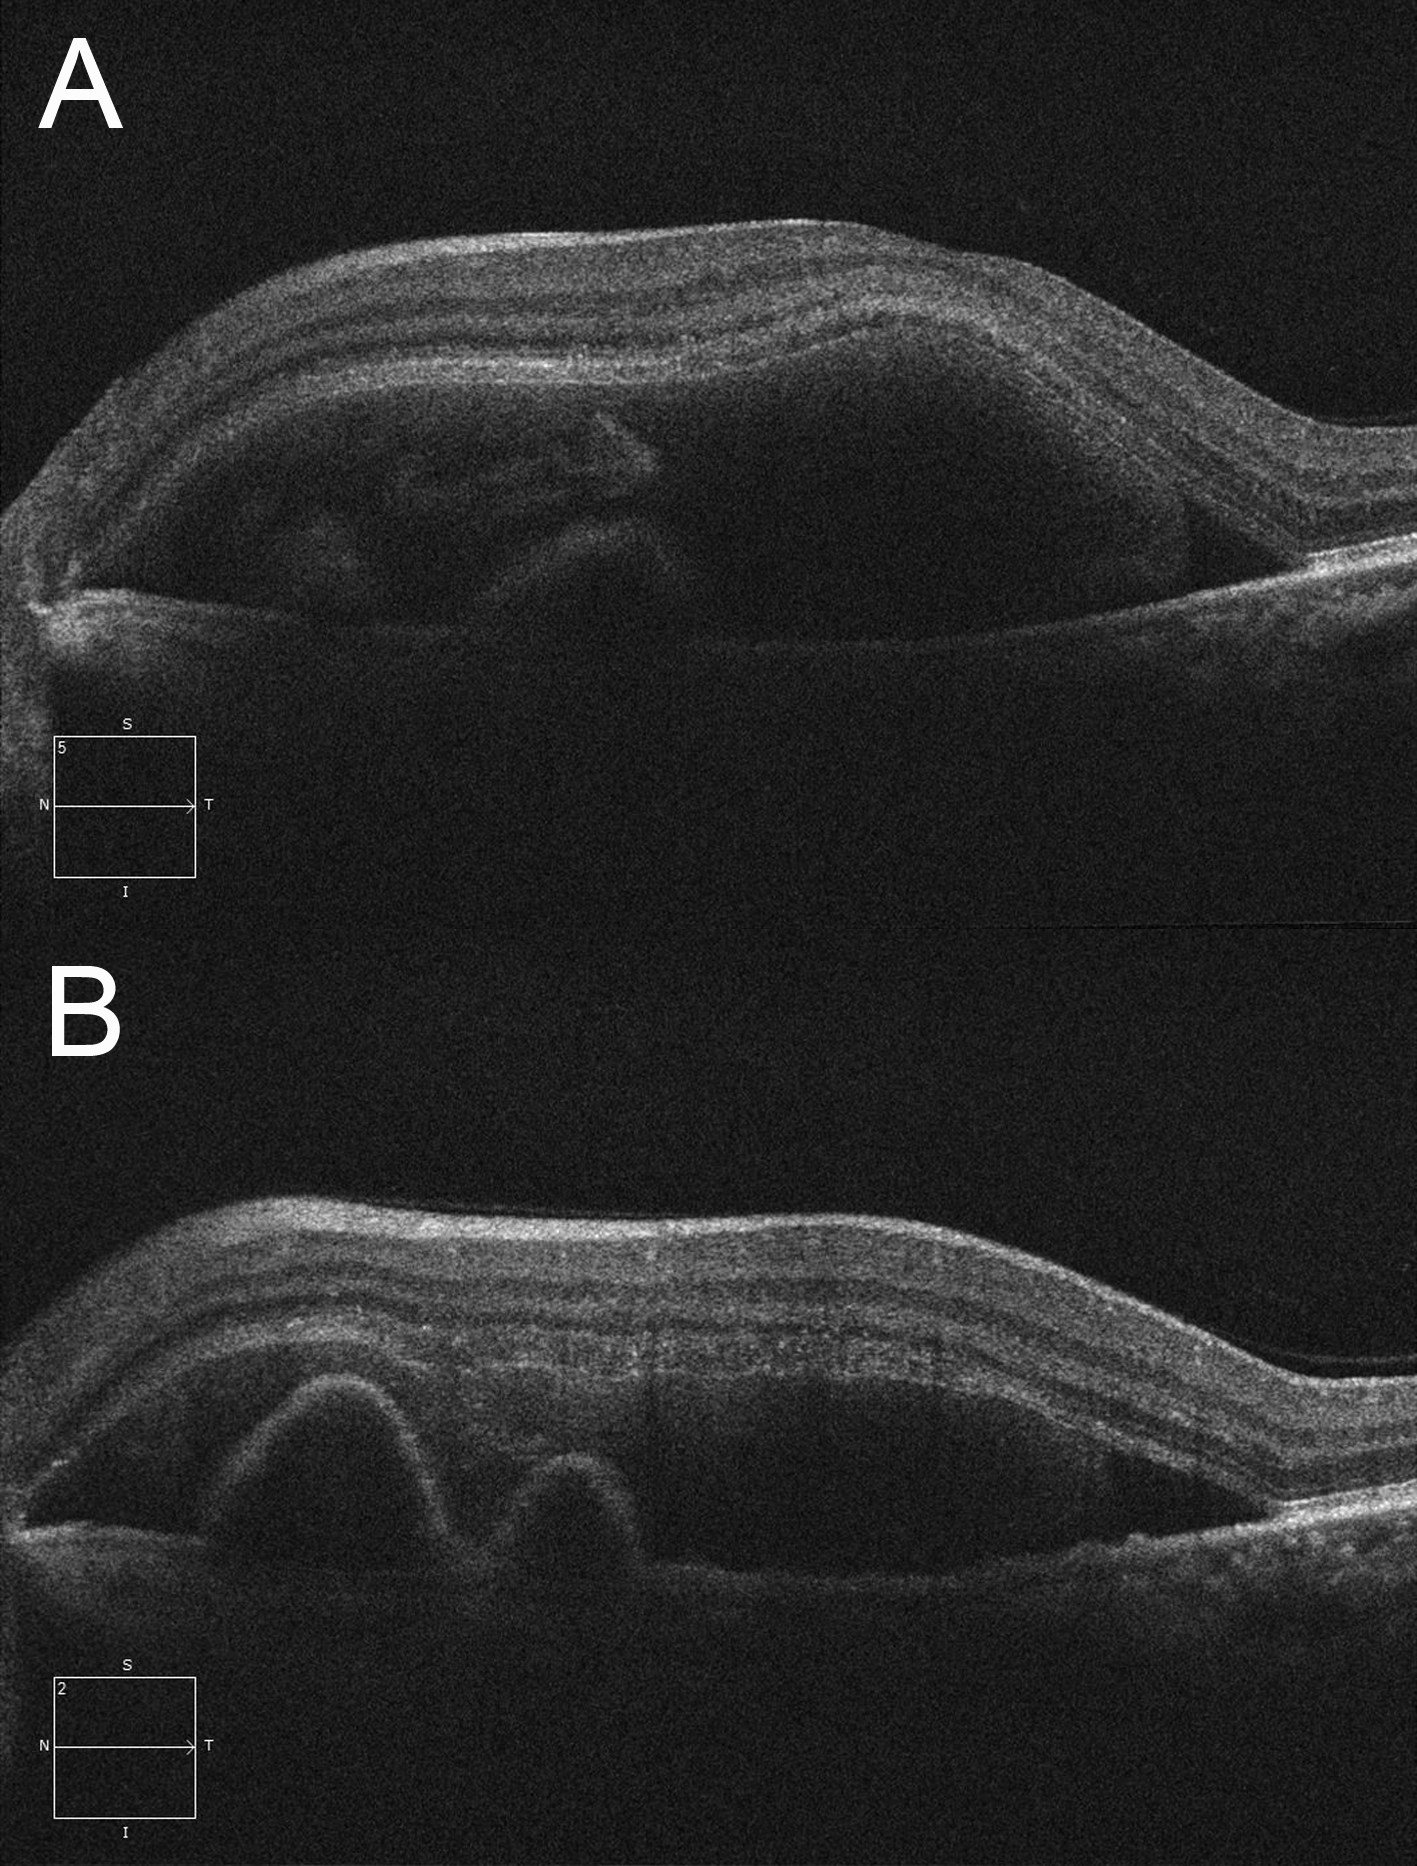 A) Left optical coherence tomography through the fovea demonstrating the subretinal location of the haemorrhage. B) Two sharply elevated pigment epithelial detachments are seen in a horizontal optical coherence raster scan taken superior to the fovea. These correspond with the polypoidal lesions noted clinically.